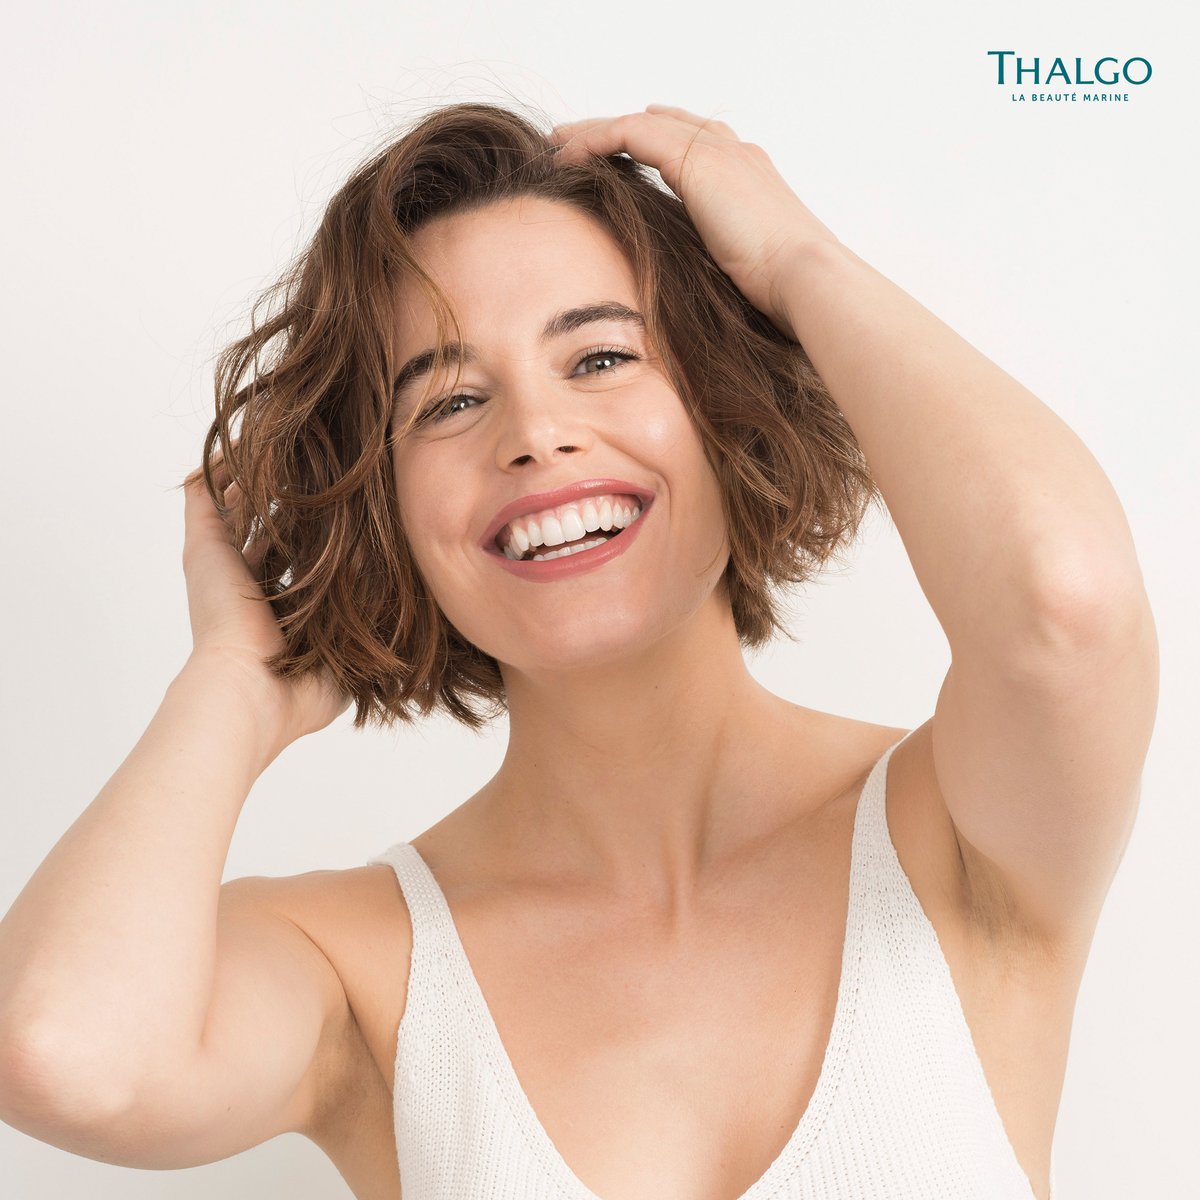 Dry, tight skin? Oh! Not on our watch. Give your skin the hydration it deserves with Thalgo's Thirst Quenching Shot Mask. Get ready to glow like never before! 

#Thalgo #ThalgoSkincare #MarineBeauty #SkincareRoutine #MarineBased #HealthySkin #NaturalBeauty #SpaDay #GlowingSkin